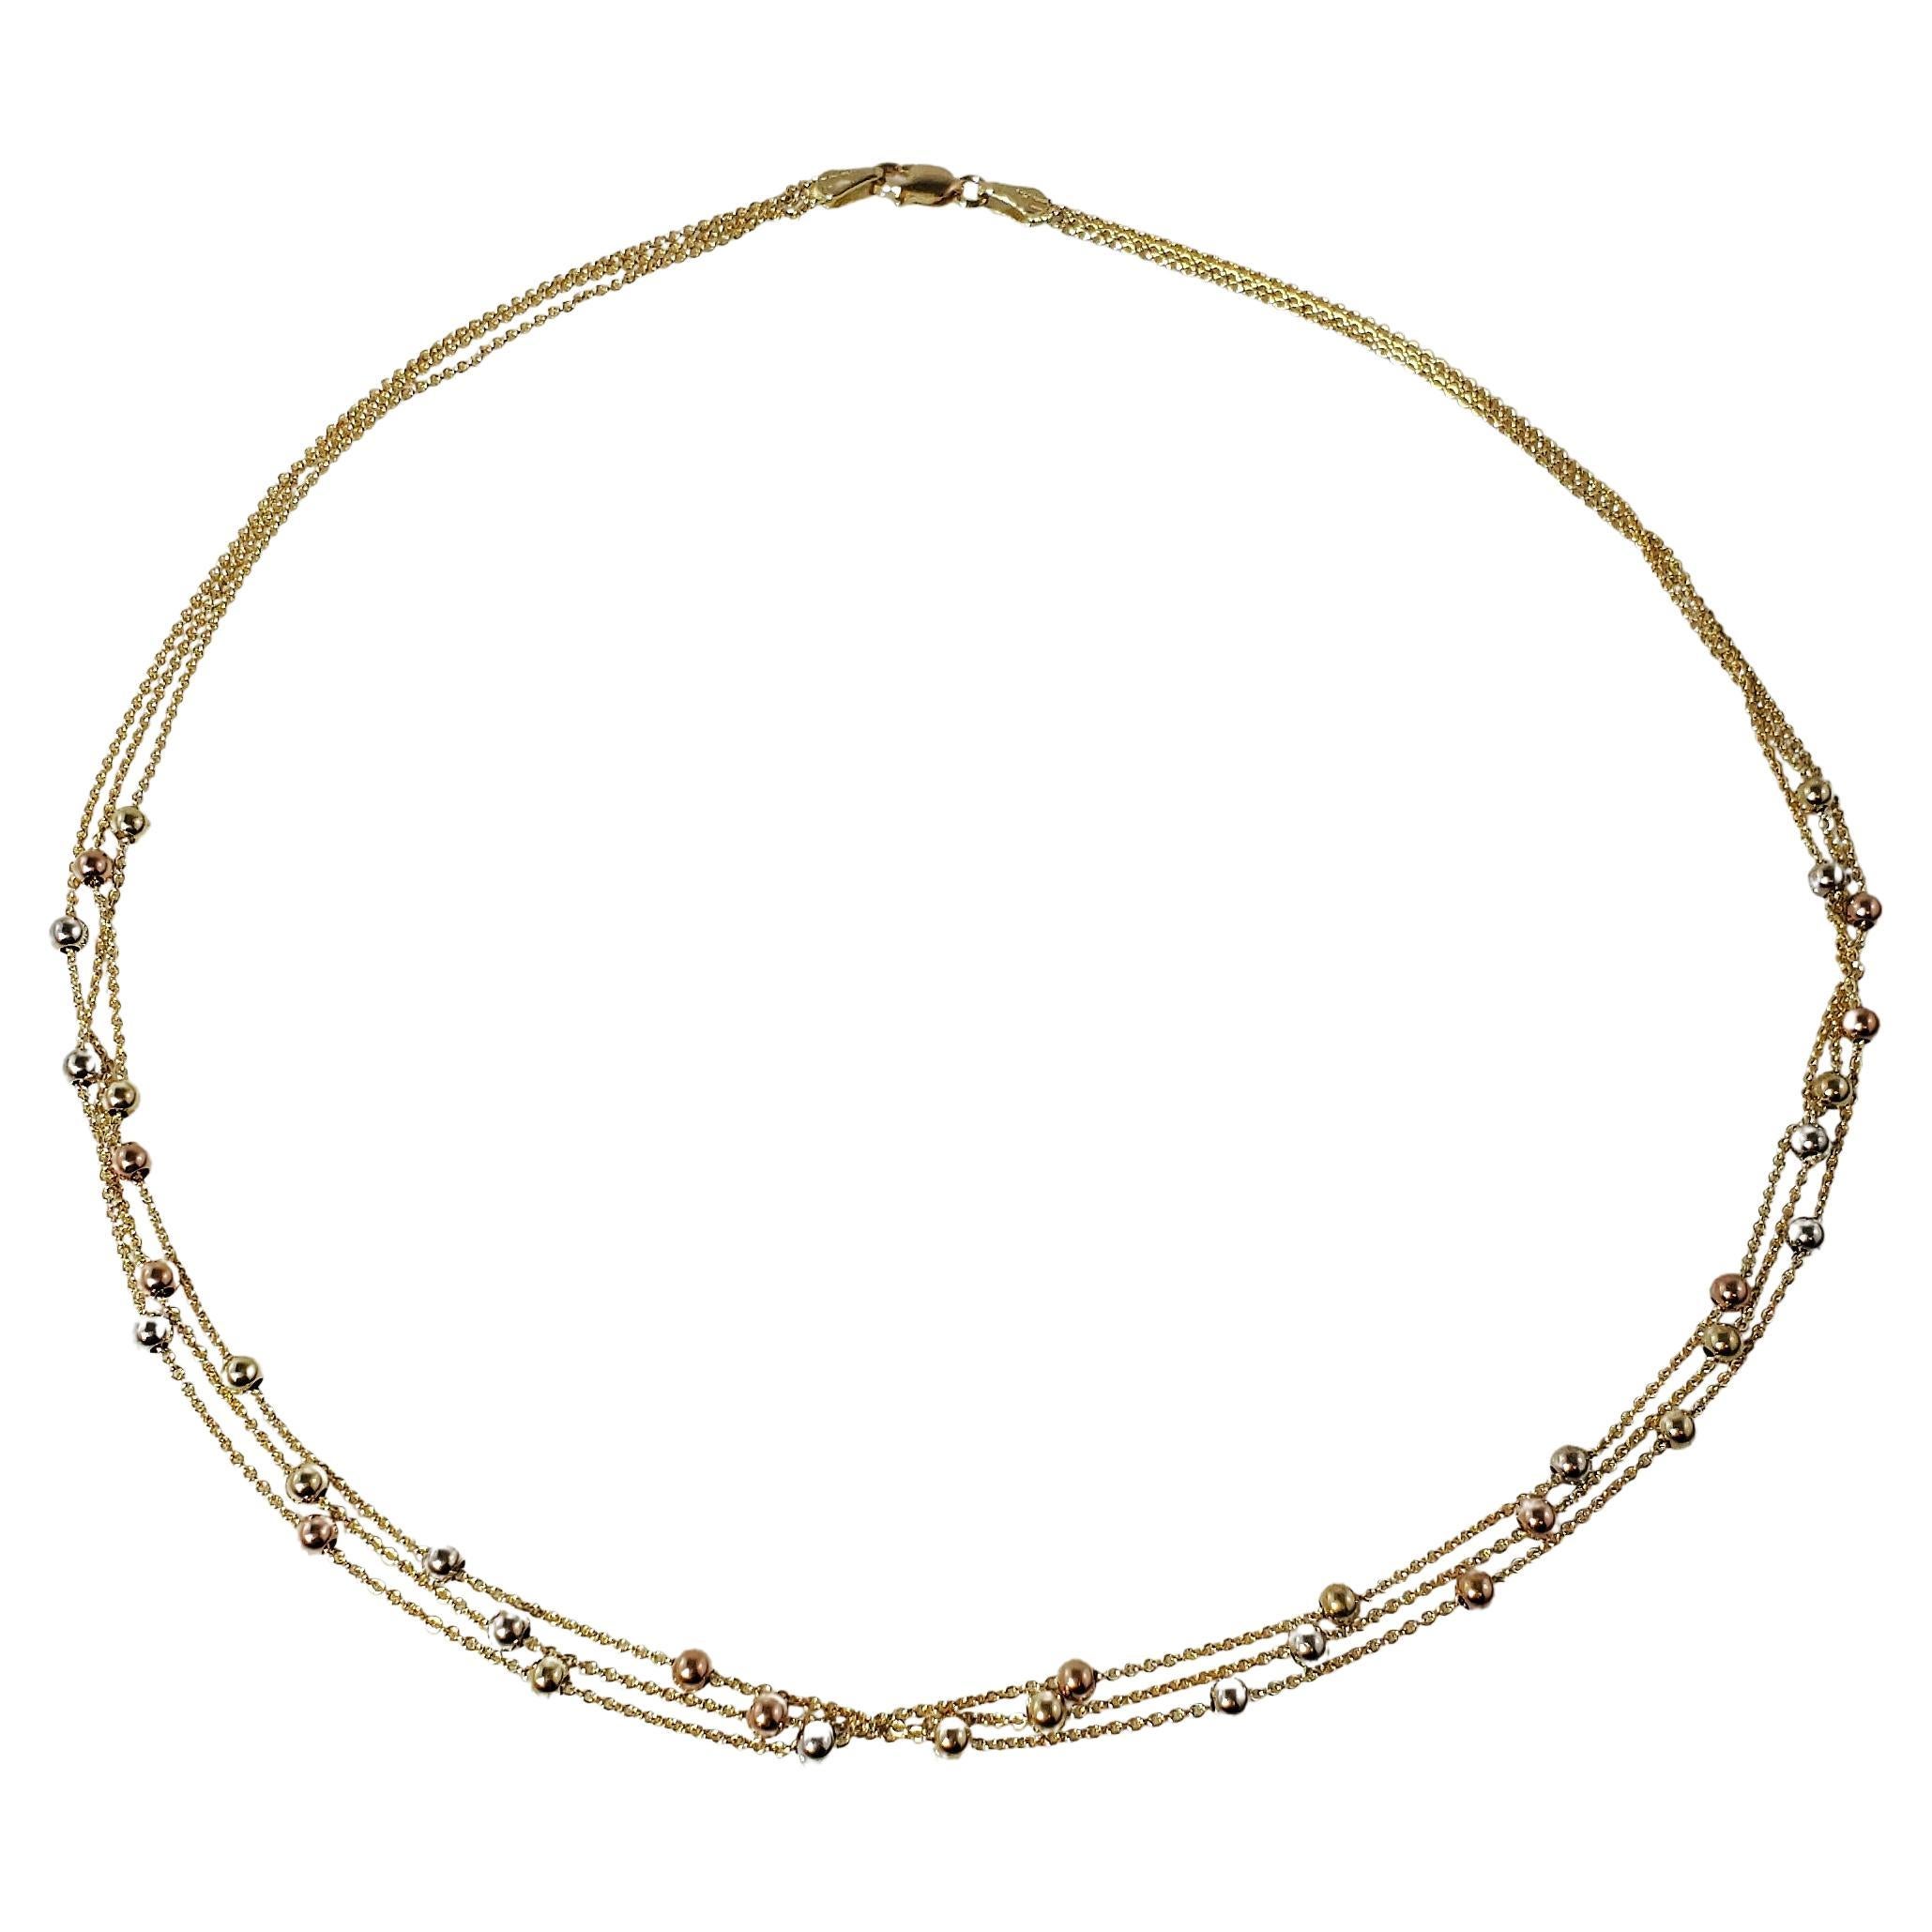 14K Yellow Gold 3 Chain Necklace with Beads